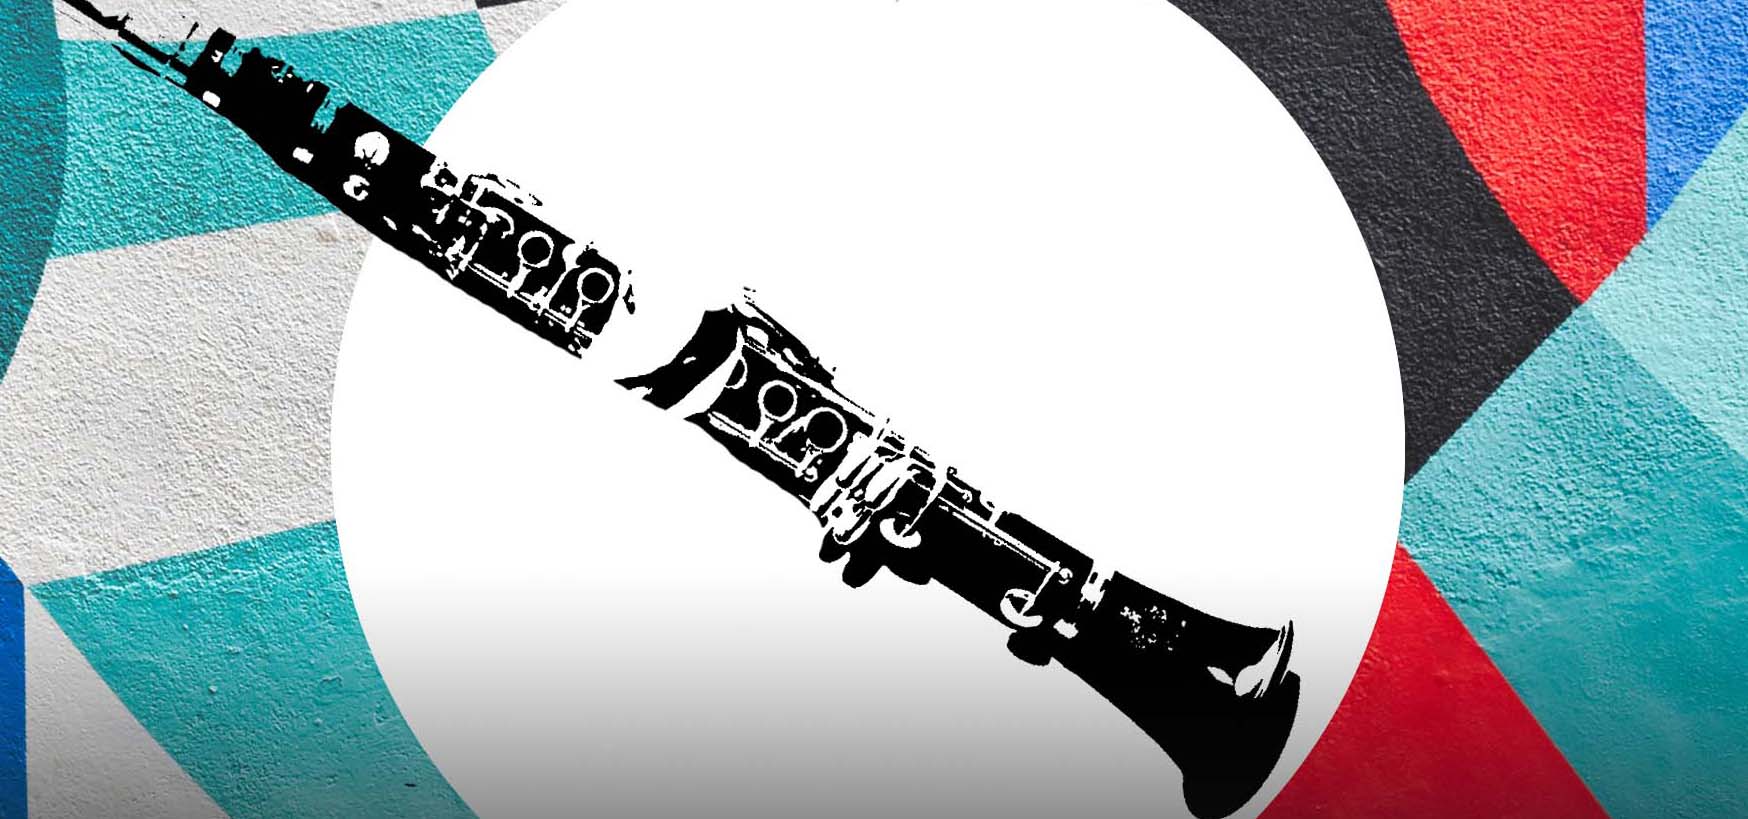 Red, blue, black and white graphic with a clarinet in the center.